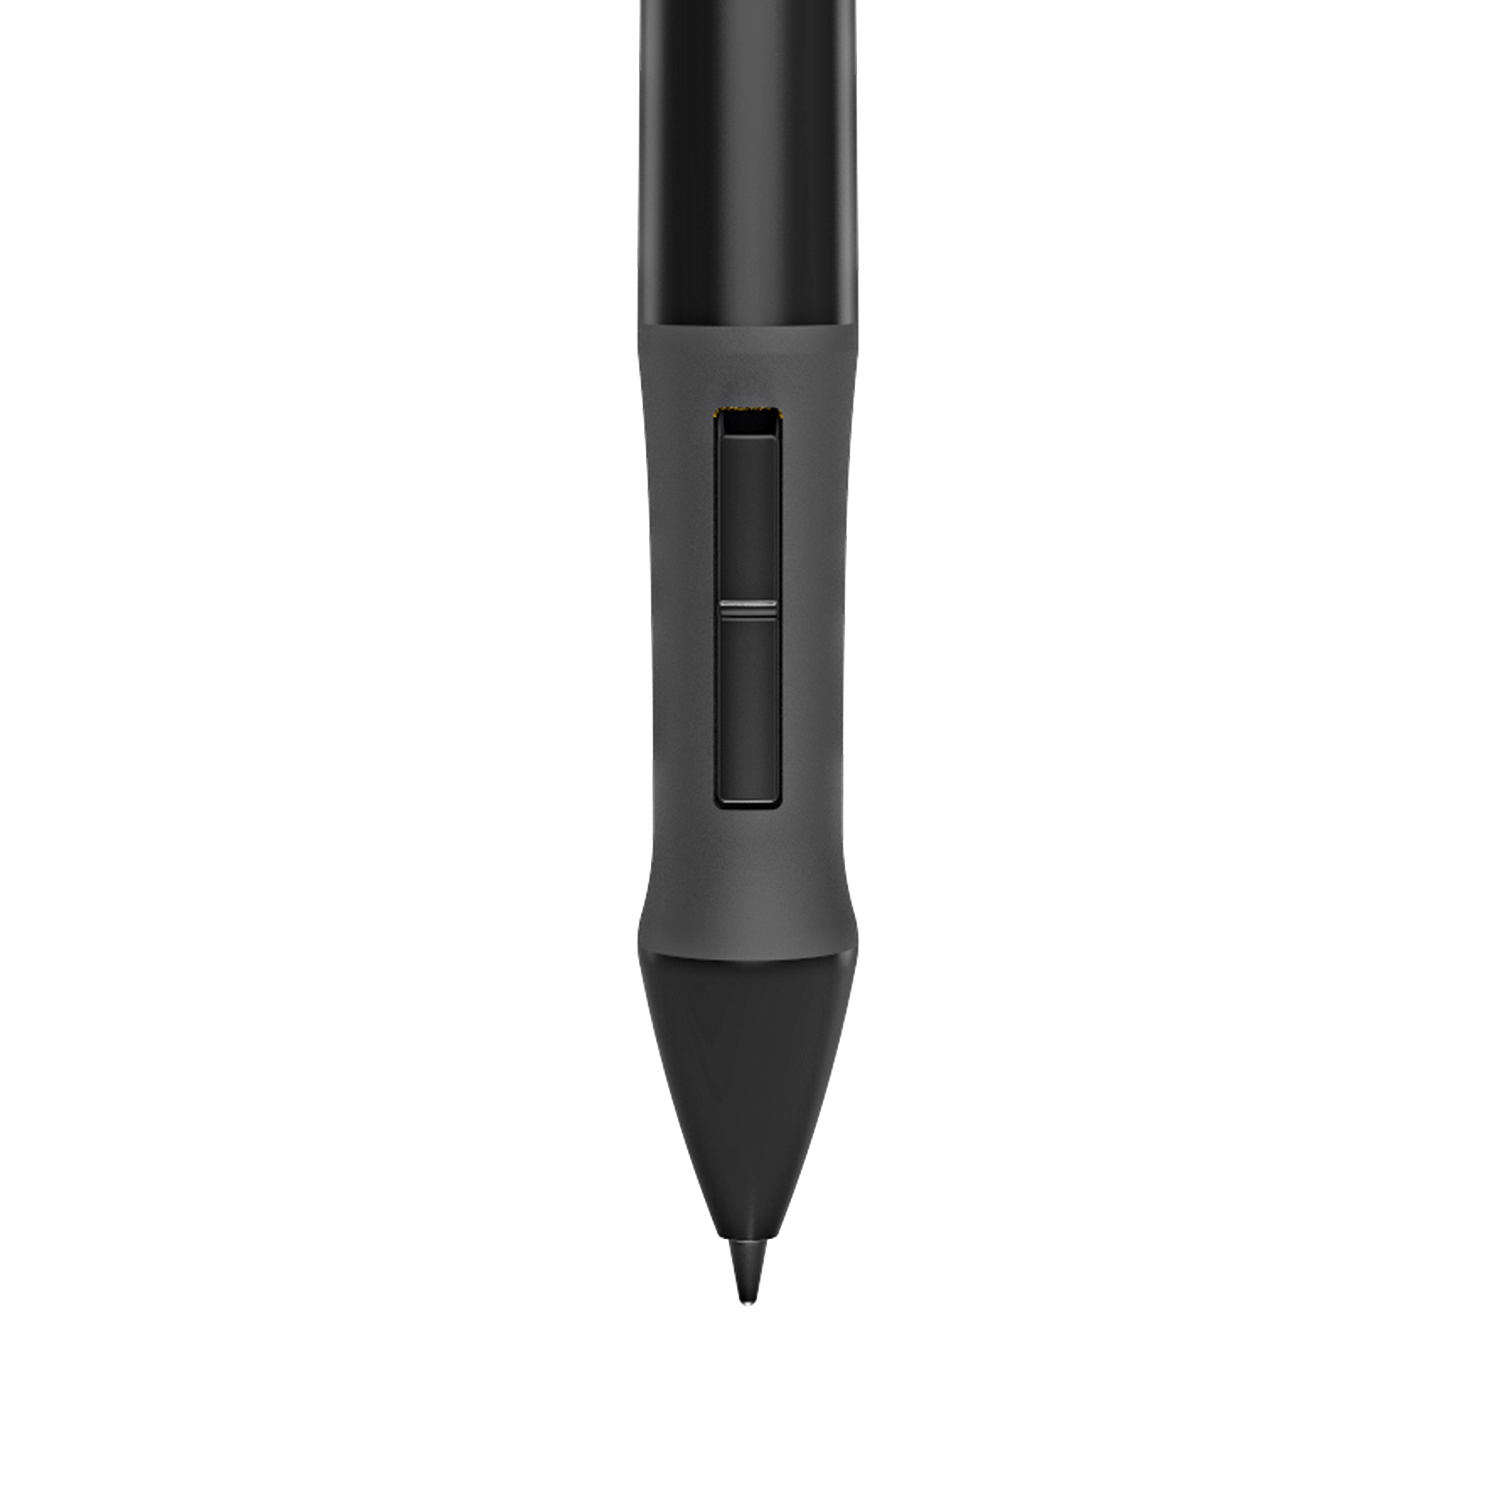 huion gt 190 pen only works when plugged in